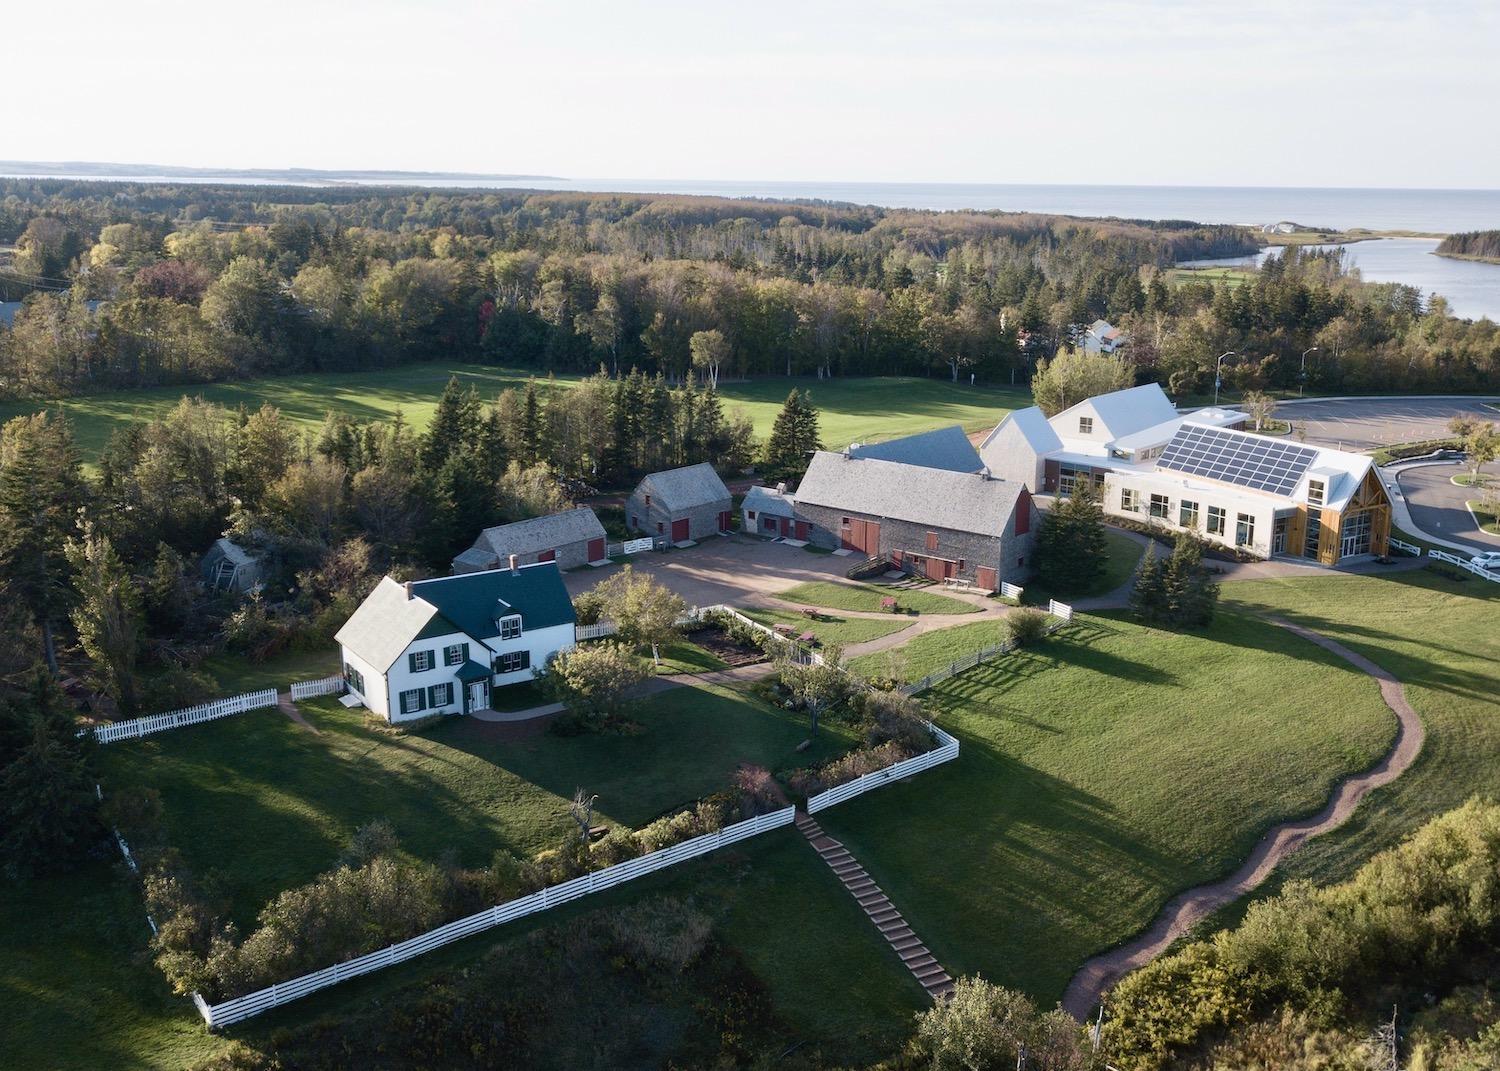 A drone captures an overview of Green Gables Heritage Place in Prince Edward Island, a site that celebrates author L.M. Montgomery and her Anne of Green Gables book series.